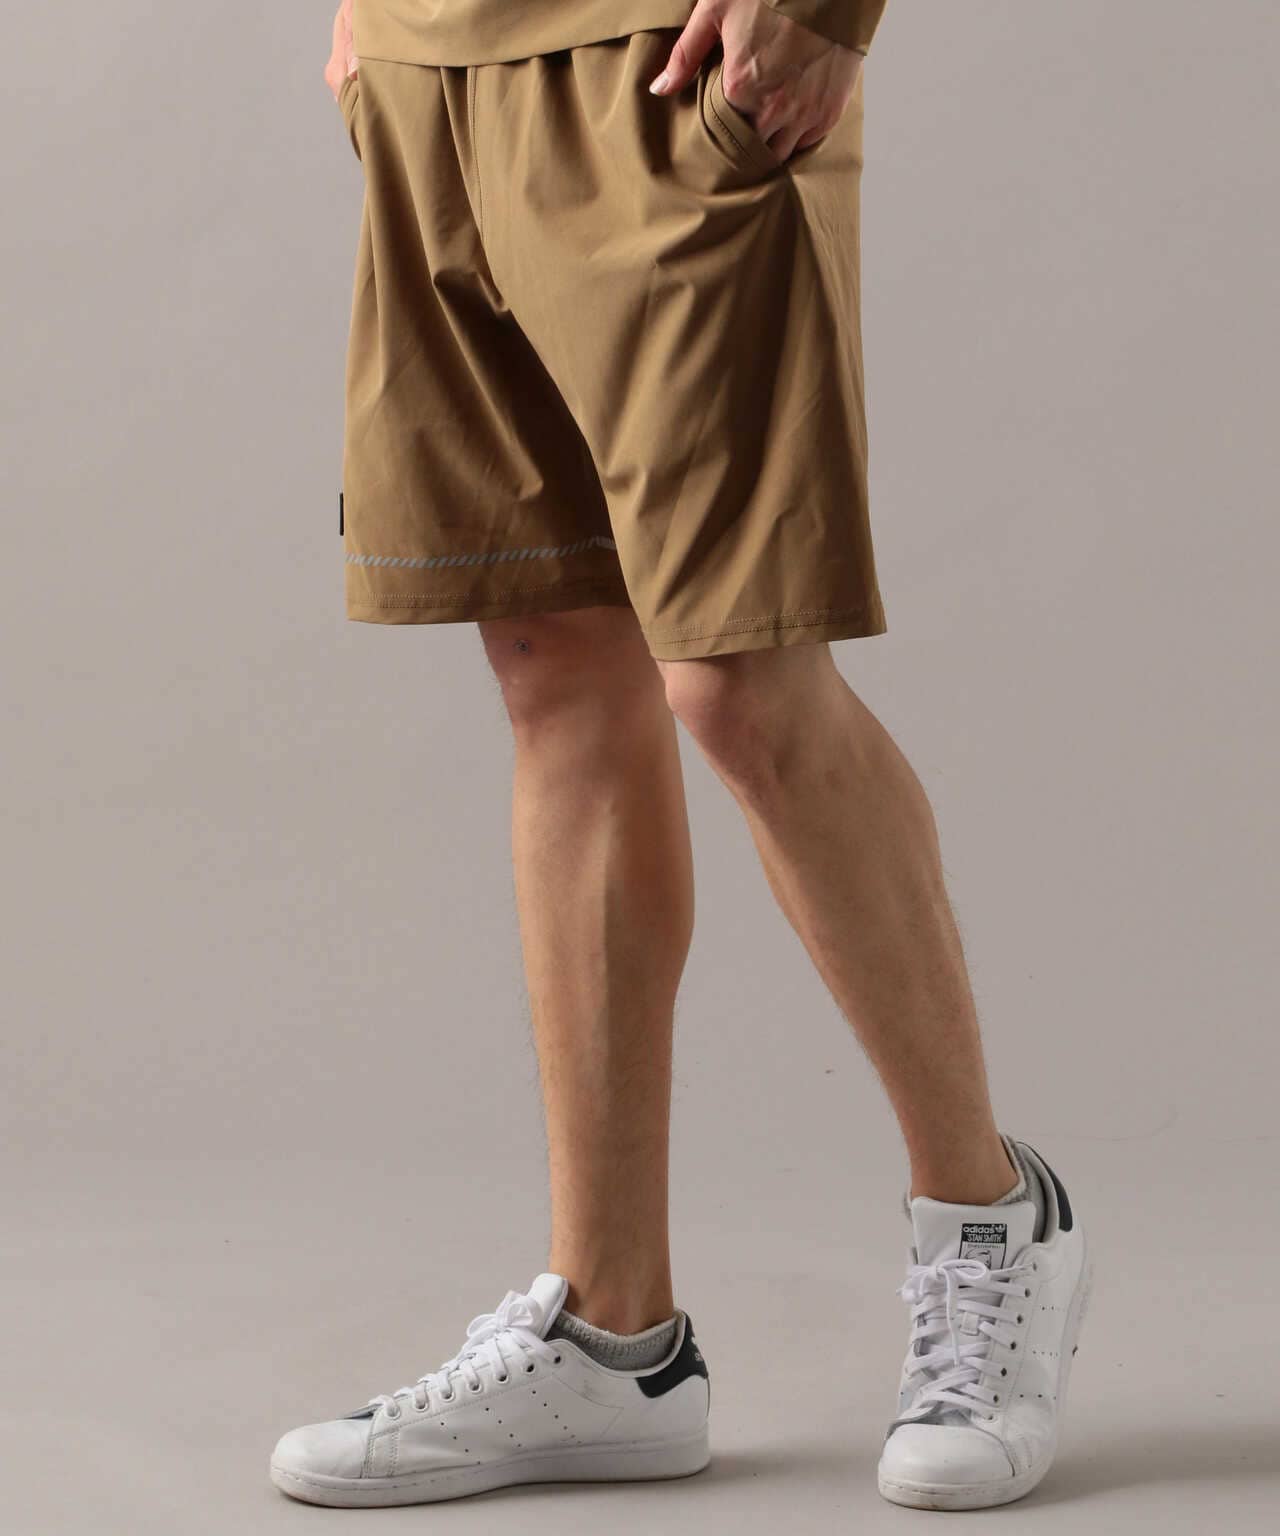 【BROWN by 2-tacs】 Easy shorts (Charcoal)